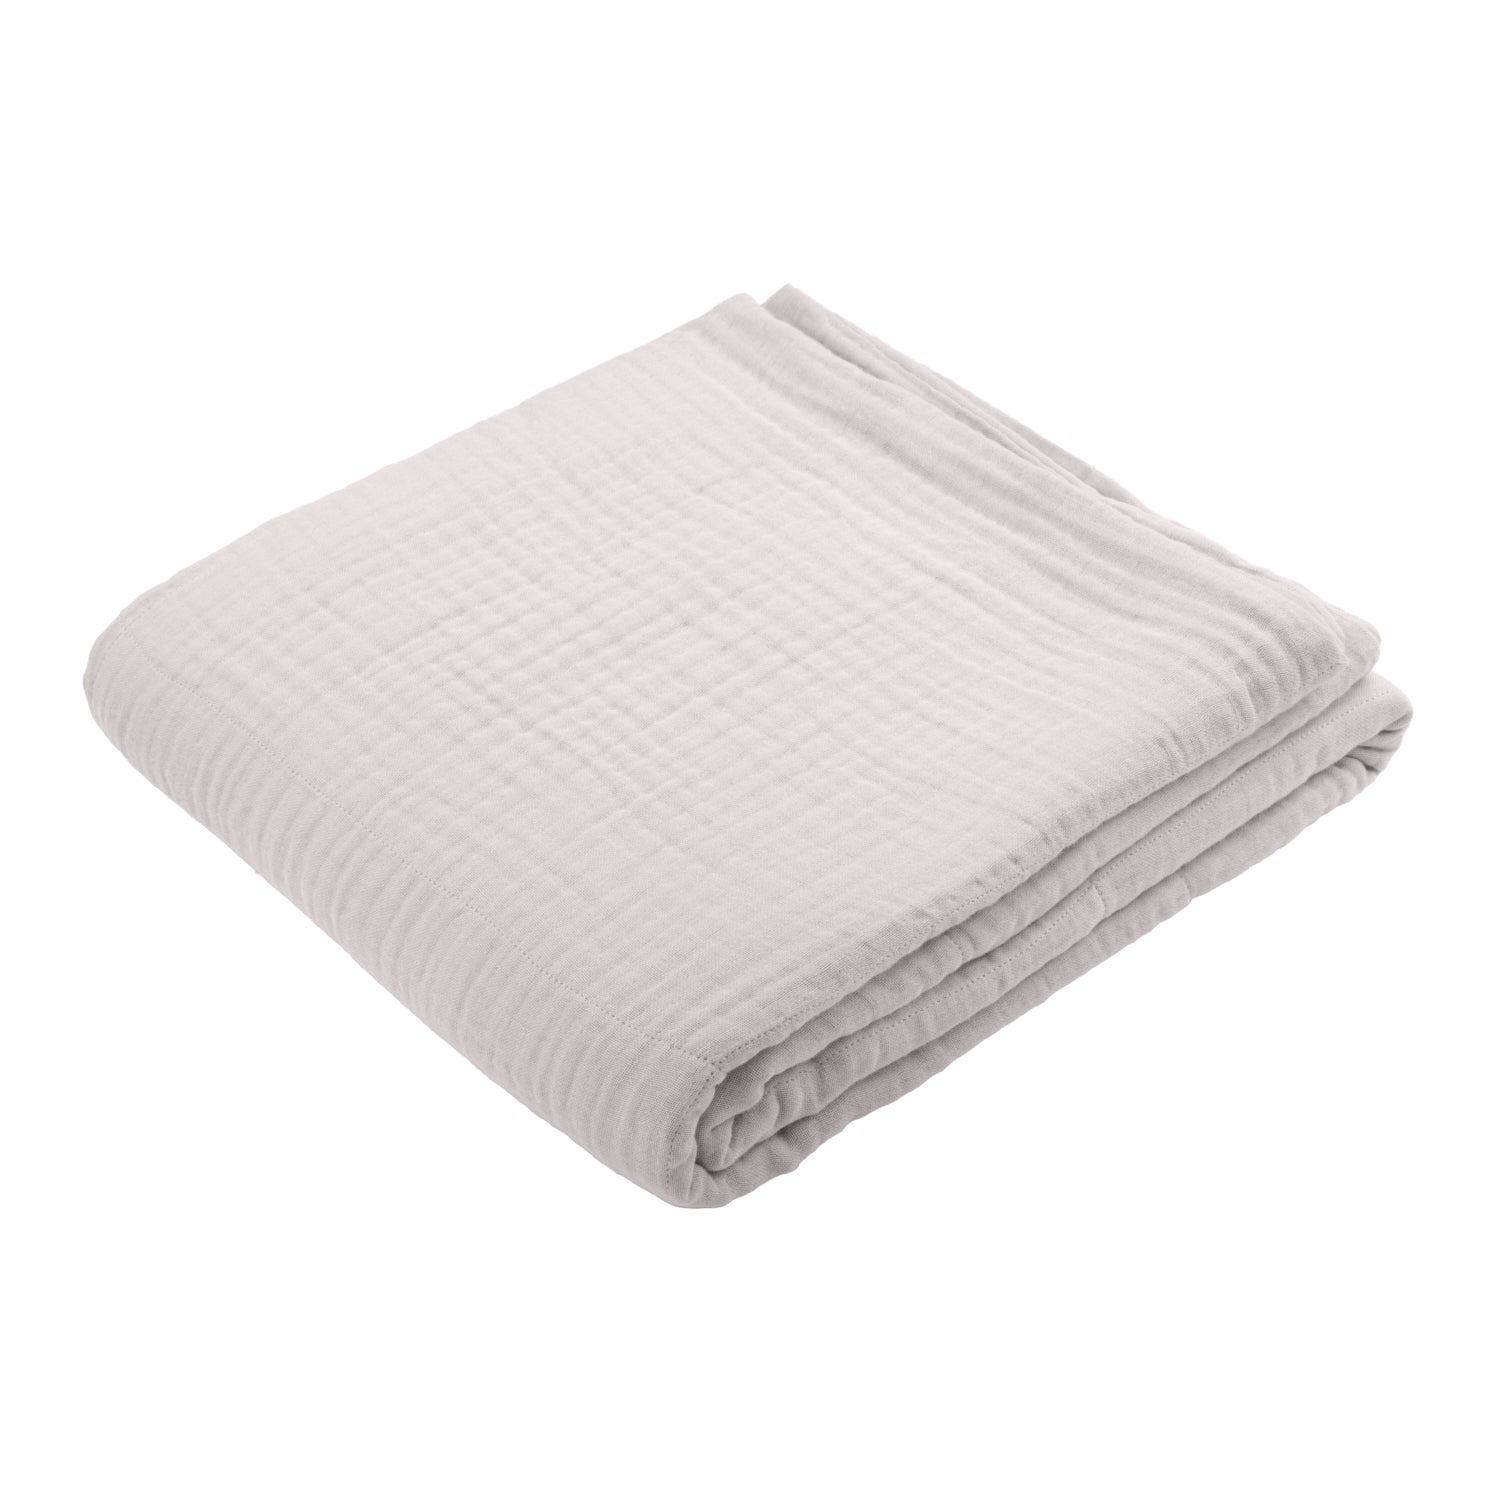 The Organic Company 6 Layer Soft Blanket, Dusty Lavender